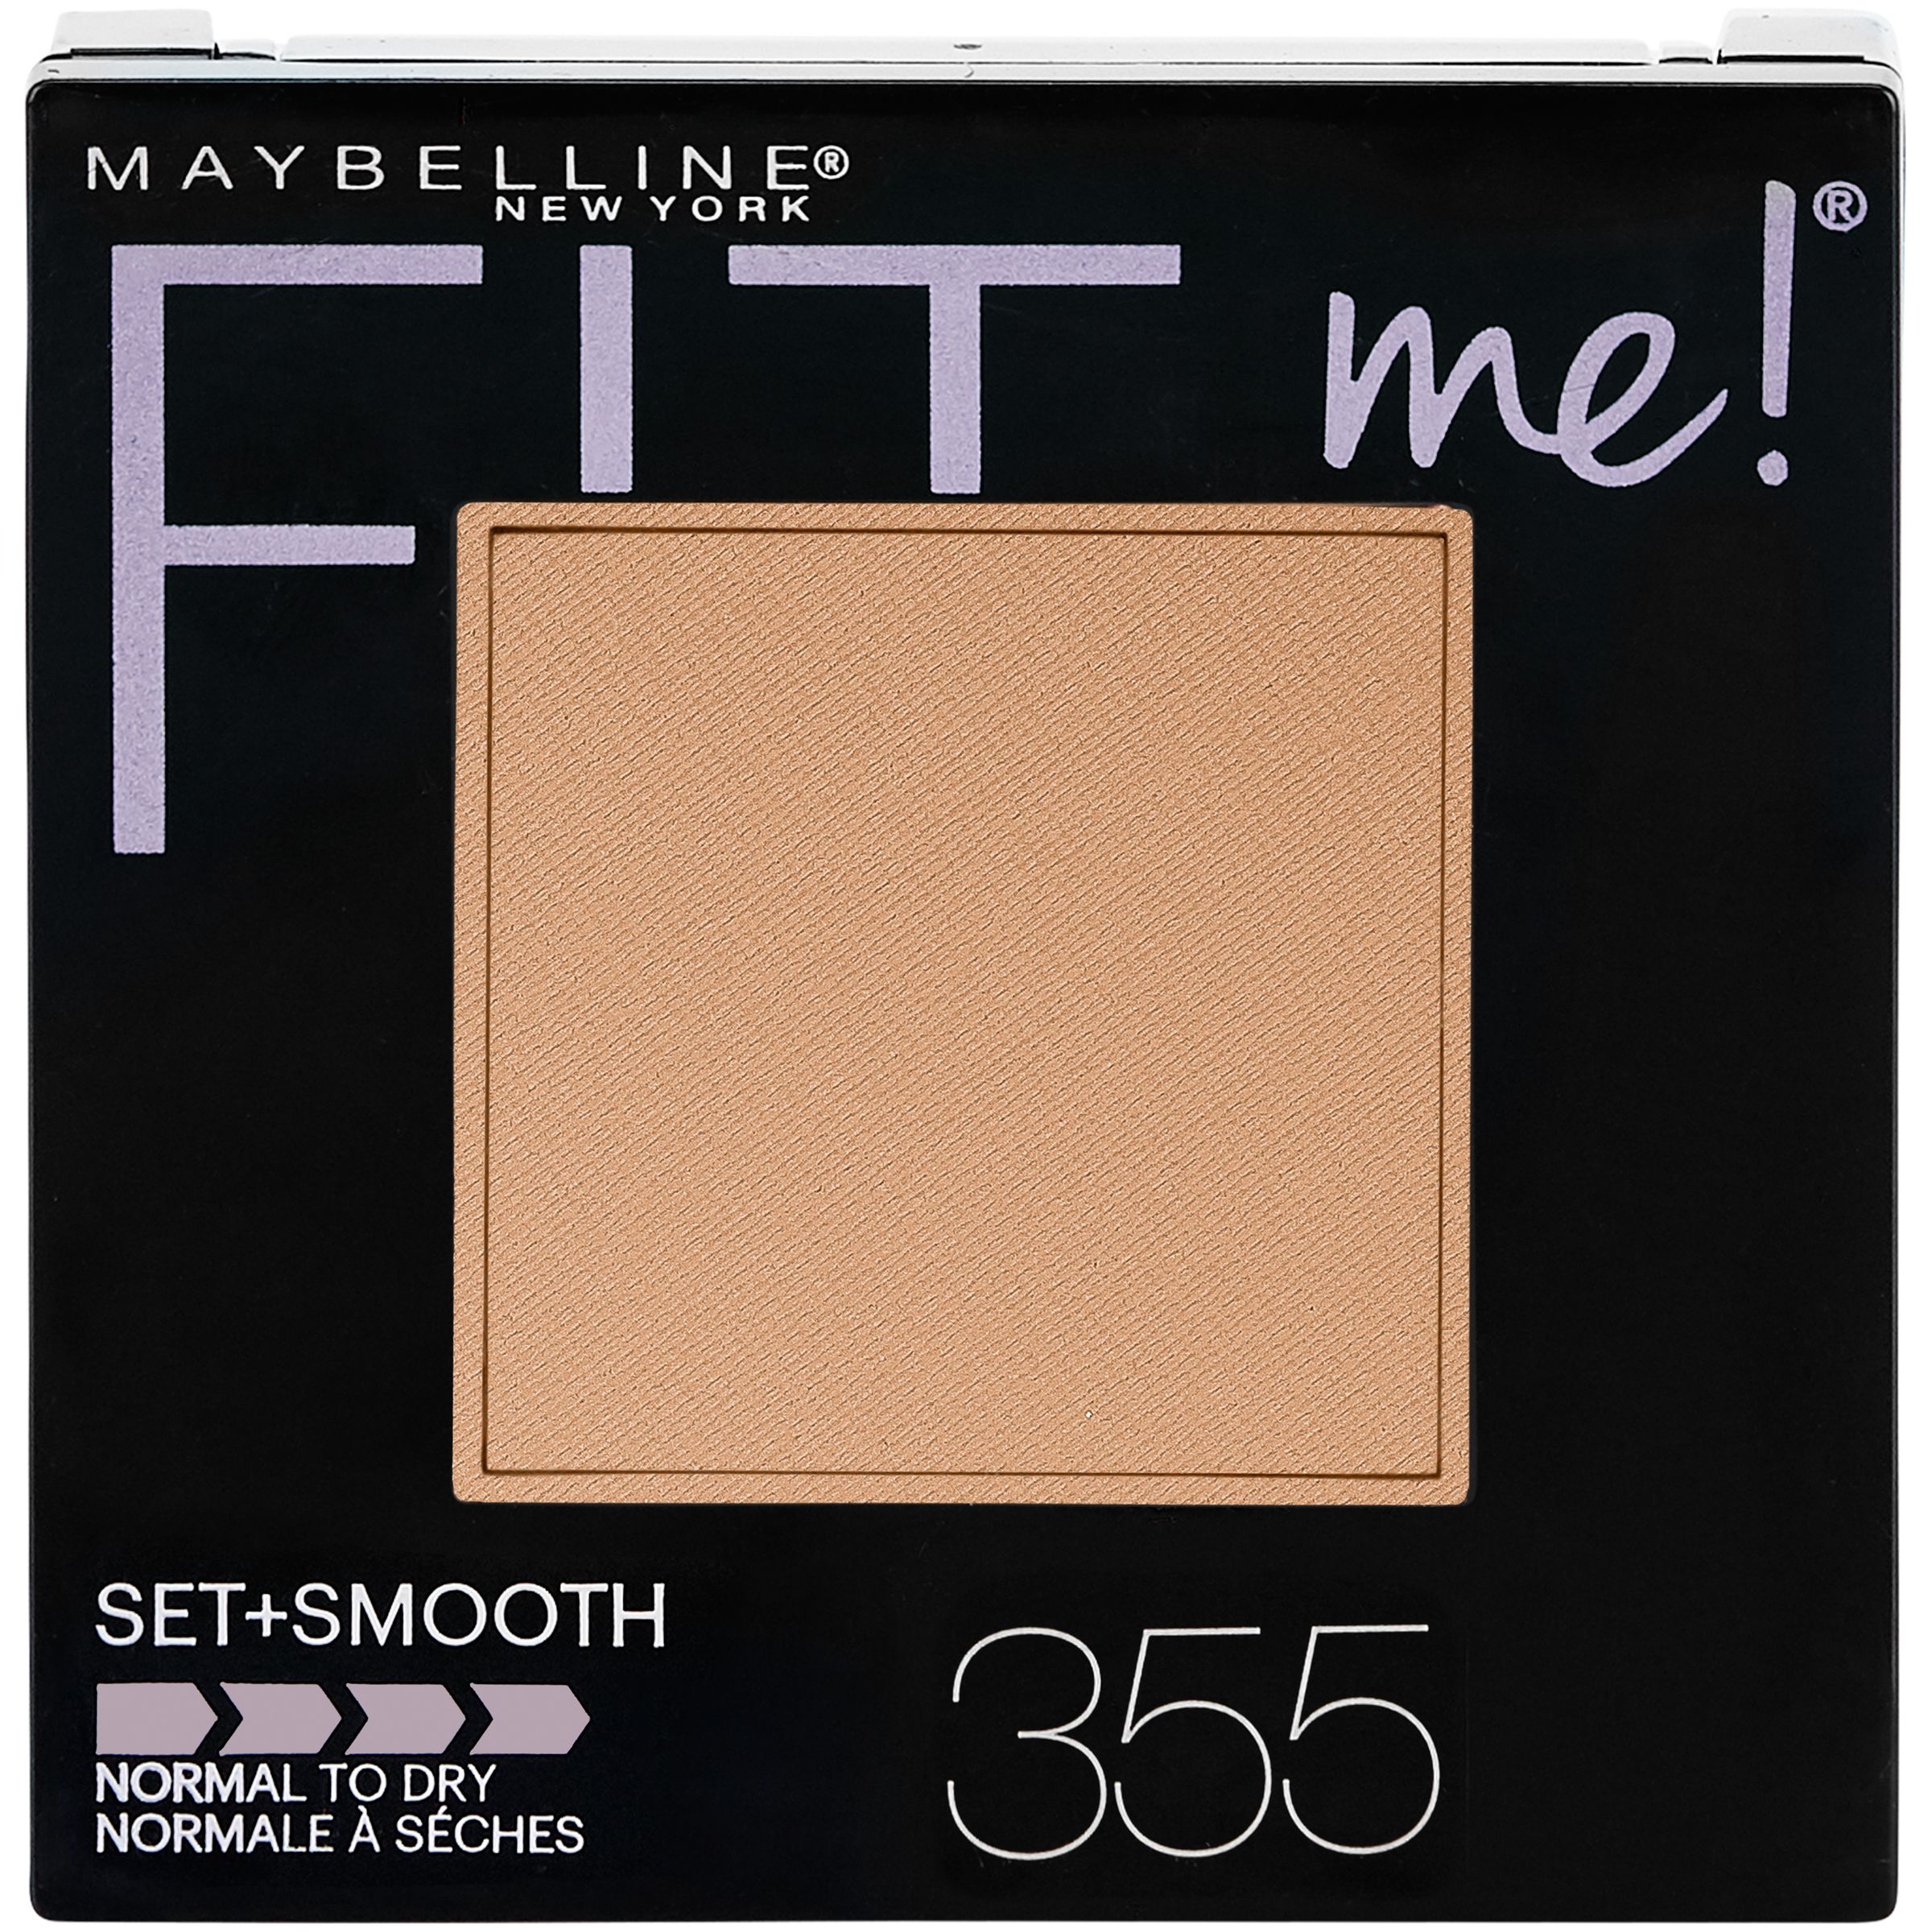 Maybelline Fit Me Set + Smooth Powder, Coconut - image 1 of 7